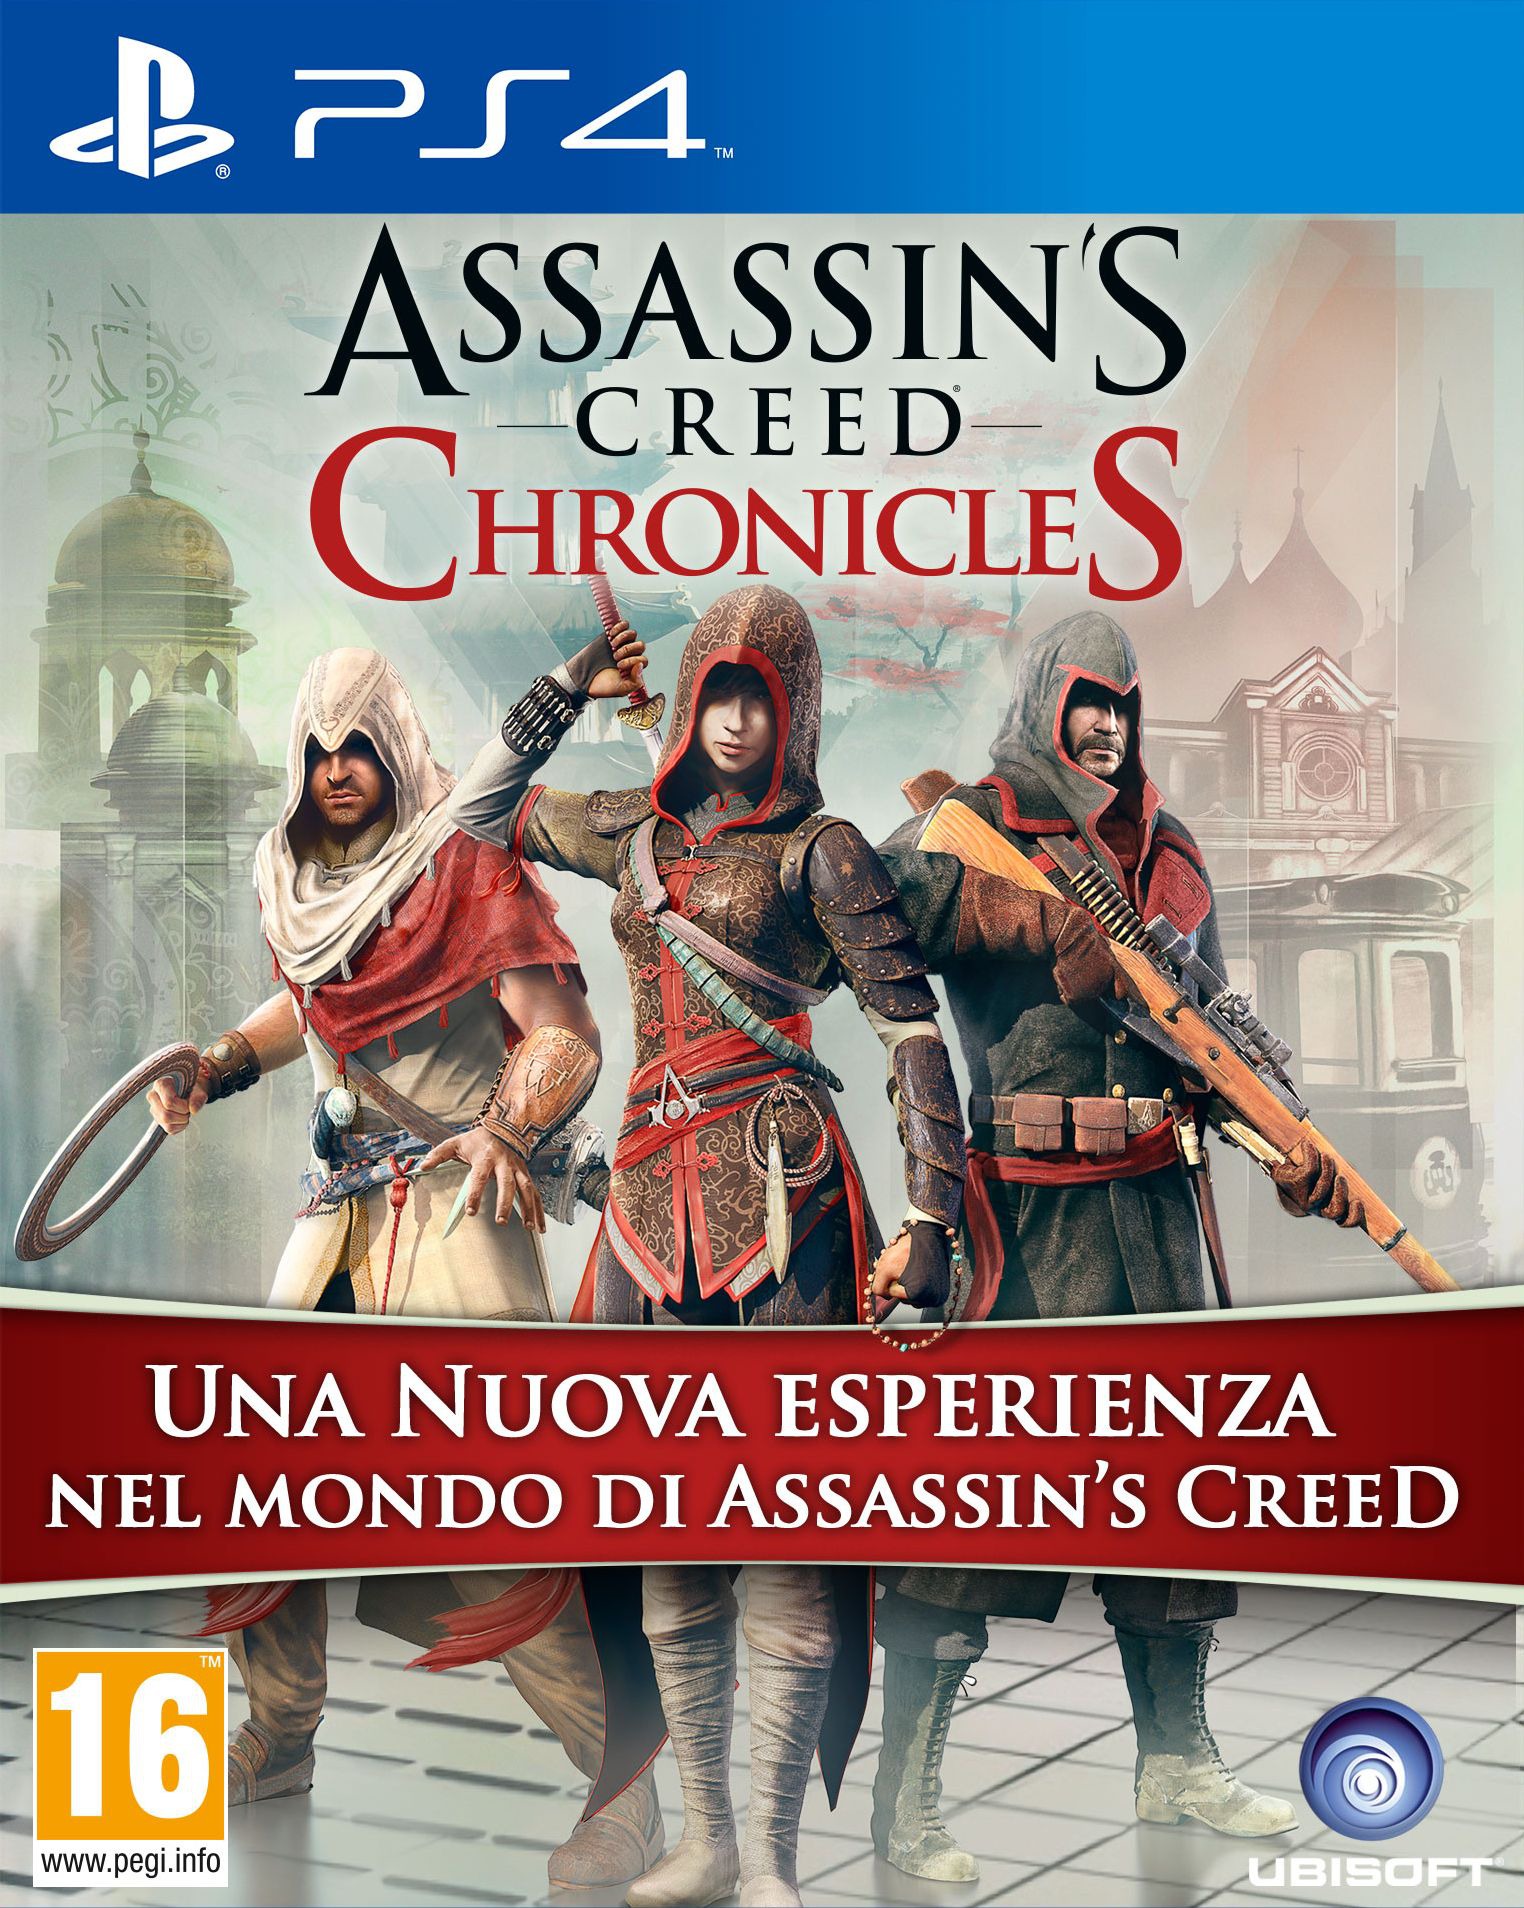 Assassins creed chronicles trilogy steam фото 40